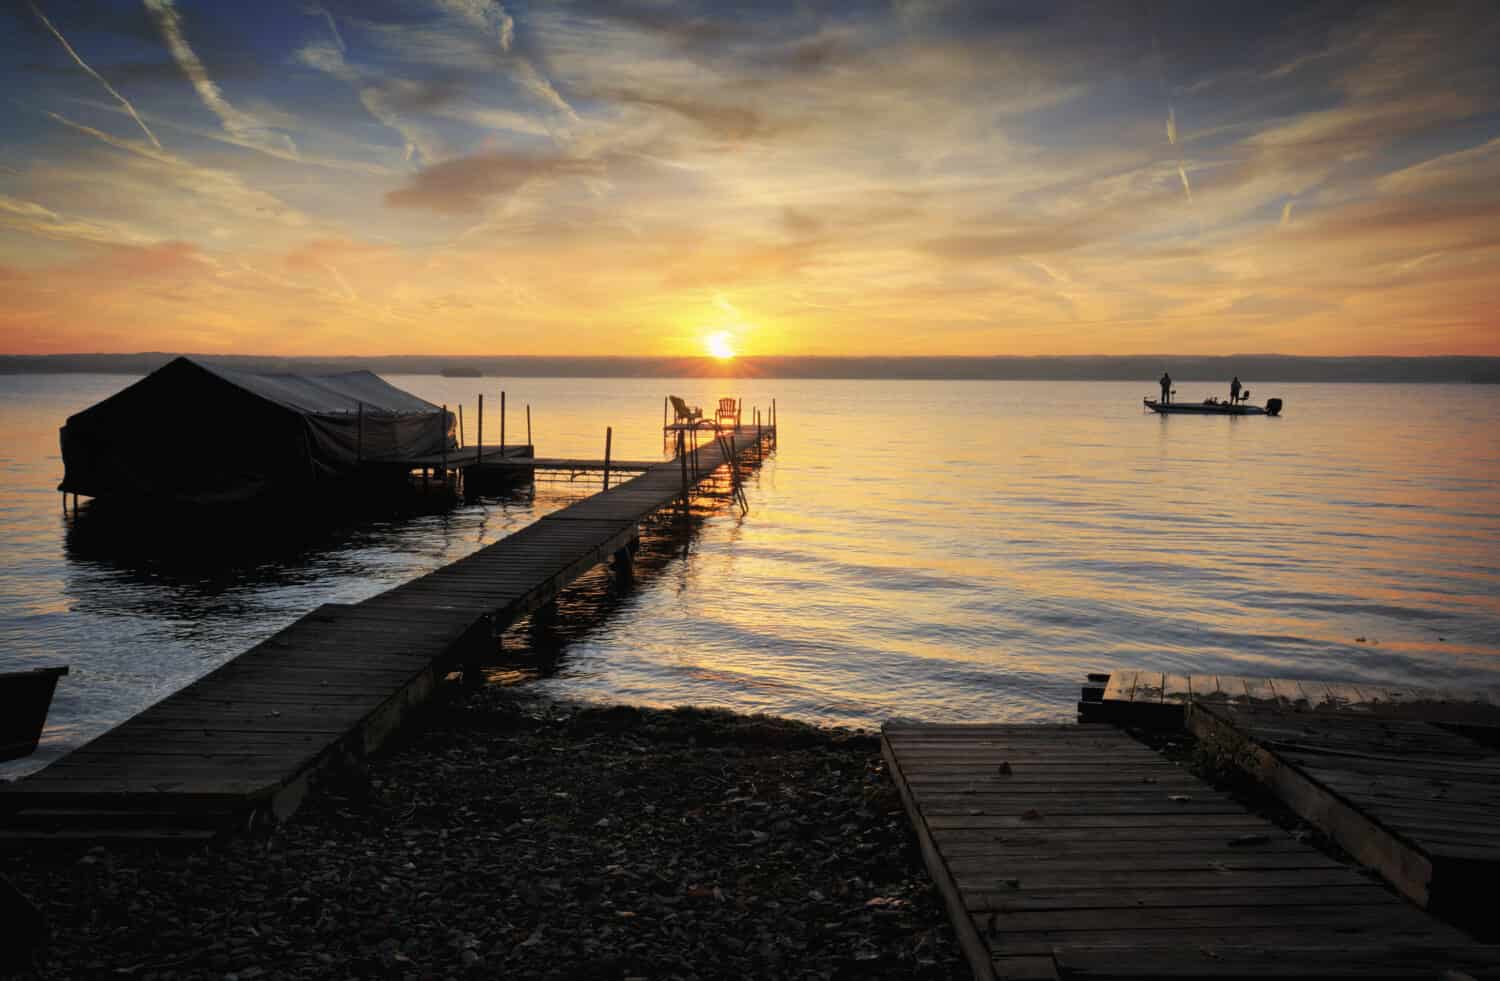 A beautiful autumn sunrise on the shores of Lake Cayuga in the Finger lakes region of New York state. A row boat is docked on the side of a pier. Two fisherman enjoy the sunrise from their boat.